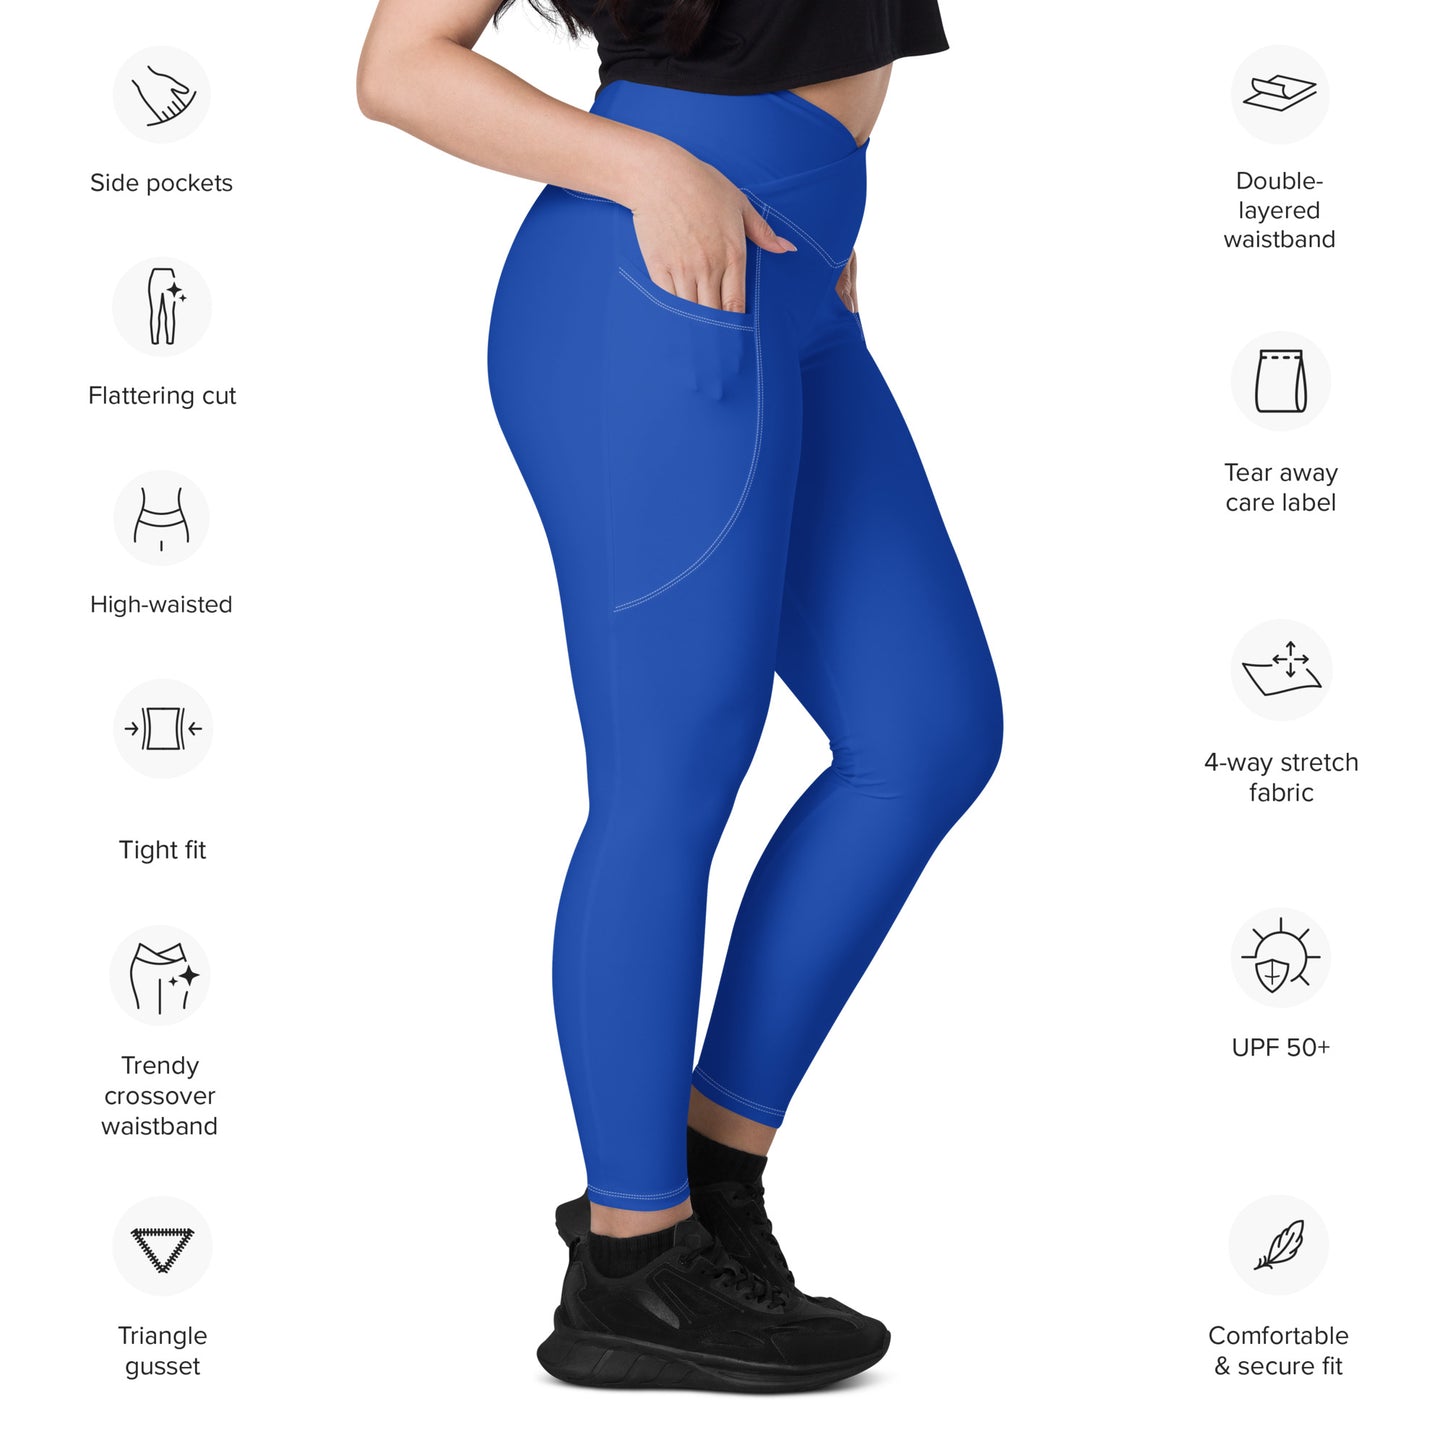 Borno Solid Blue Crossover Waist 7/8 Recycled Yoga Leggings / Yoga Pants with Pockets